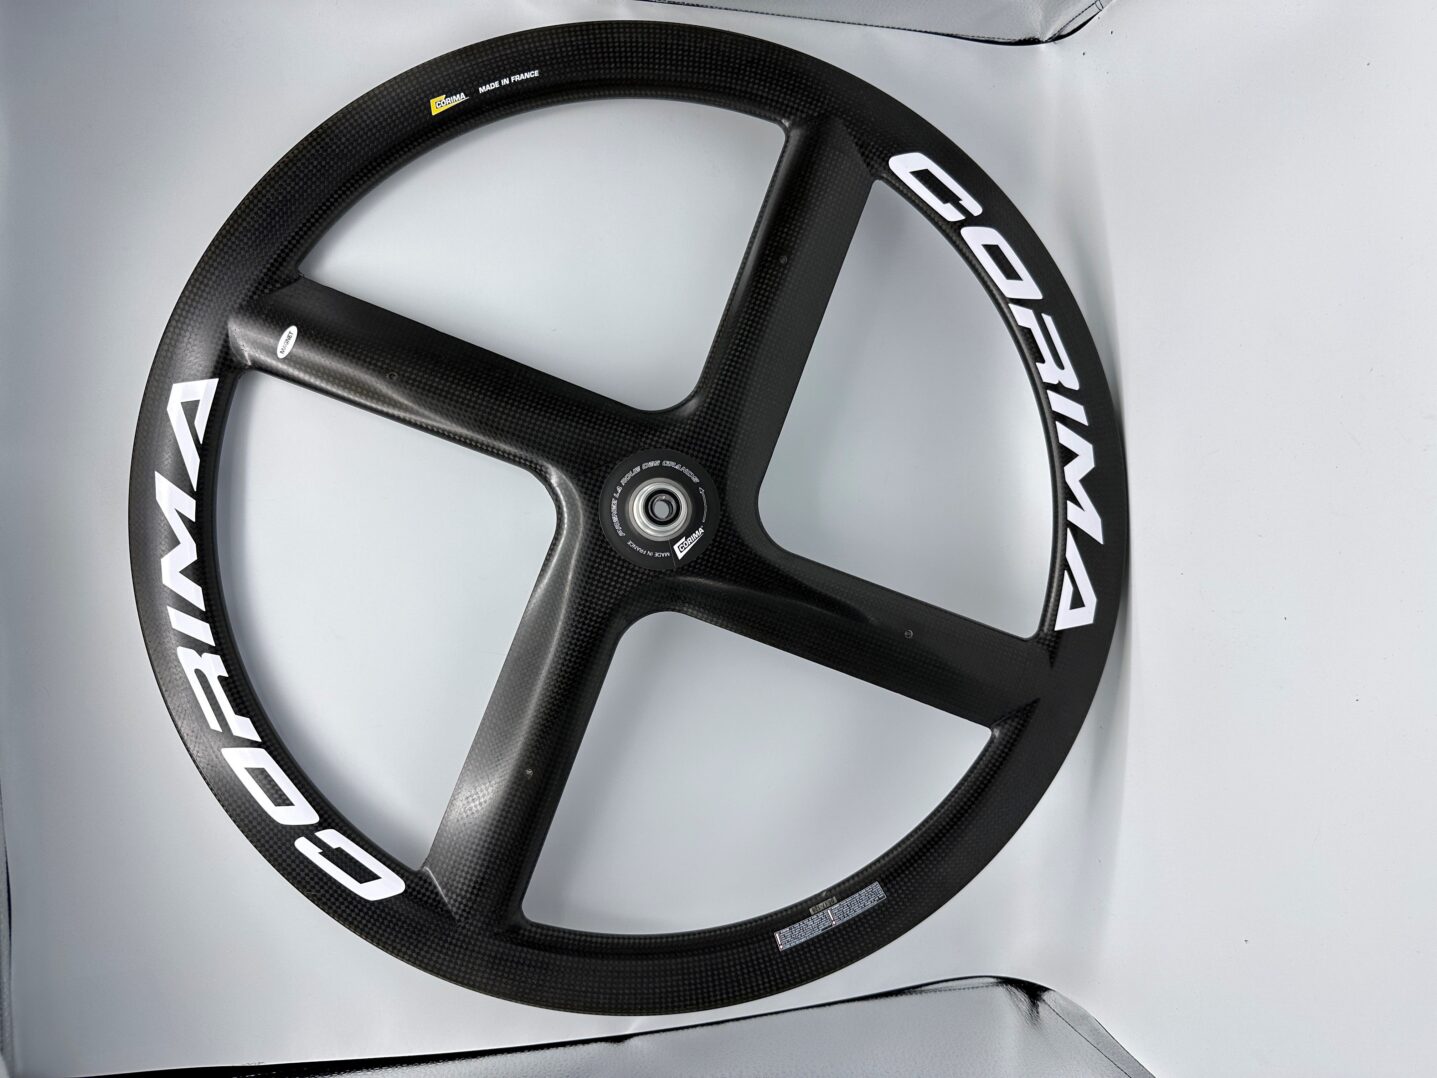 A RW-Carbonbike 20" racing chair wheel in a box with a logo on it.